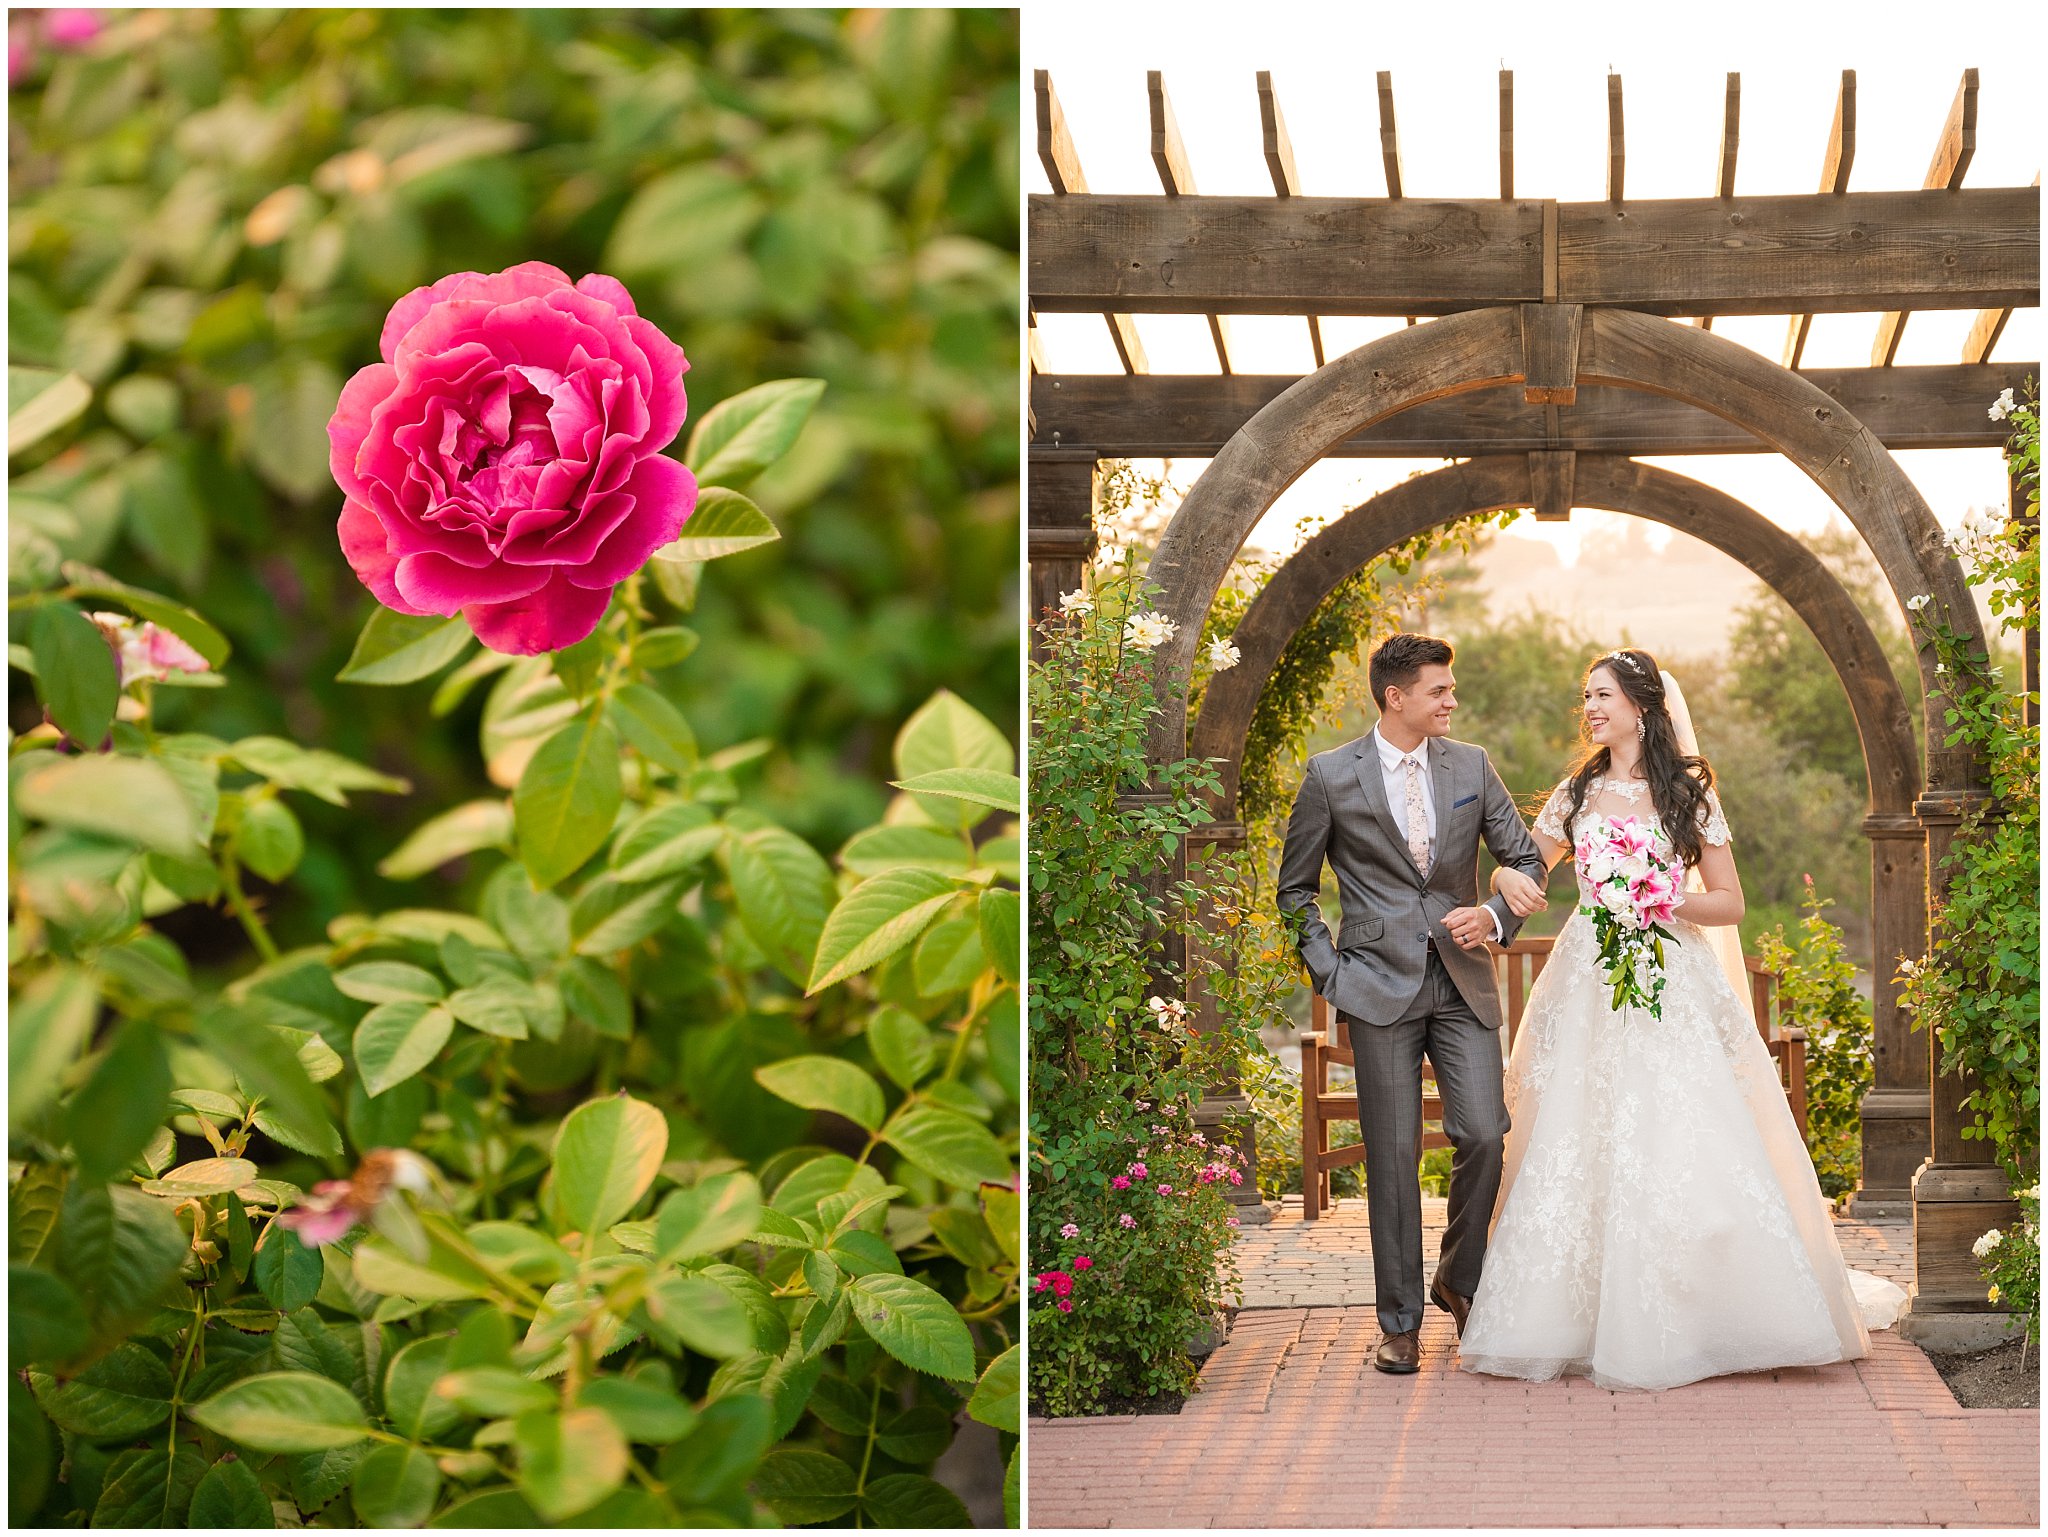 Bride and Groom laughing during wedding portraits during the summer surrounded by flowers and gardens | Thanksgiving Point Ashton Garden Formal Session | Jessie and Dallin Photography